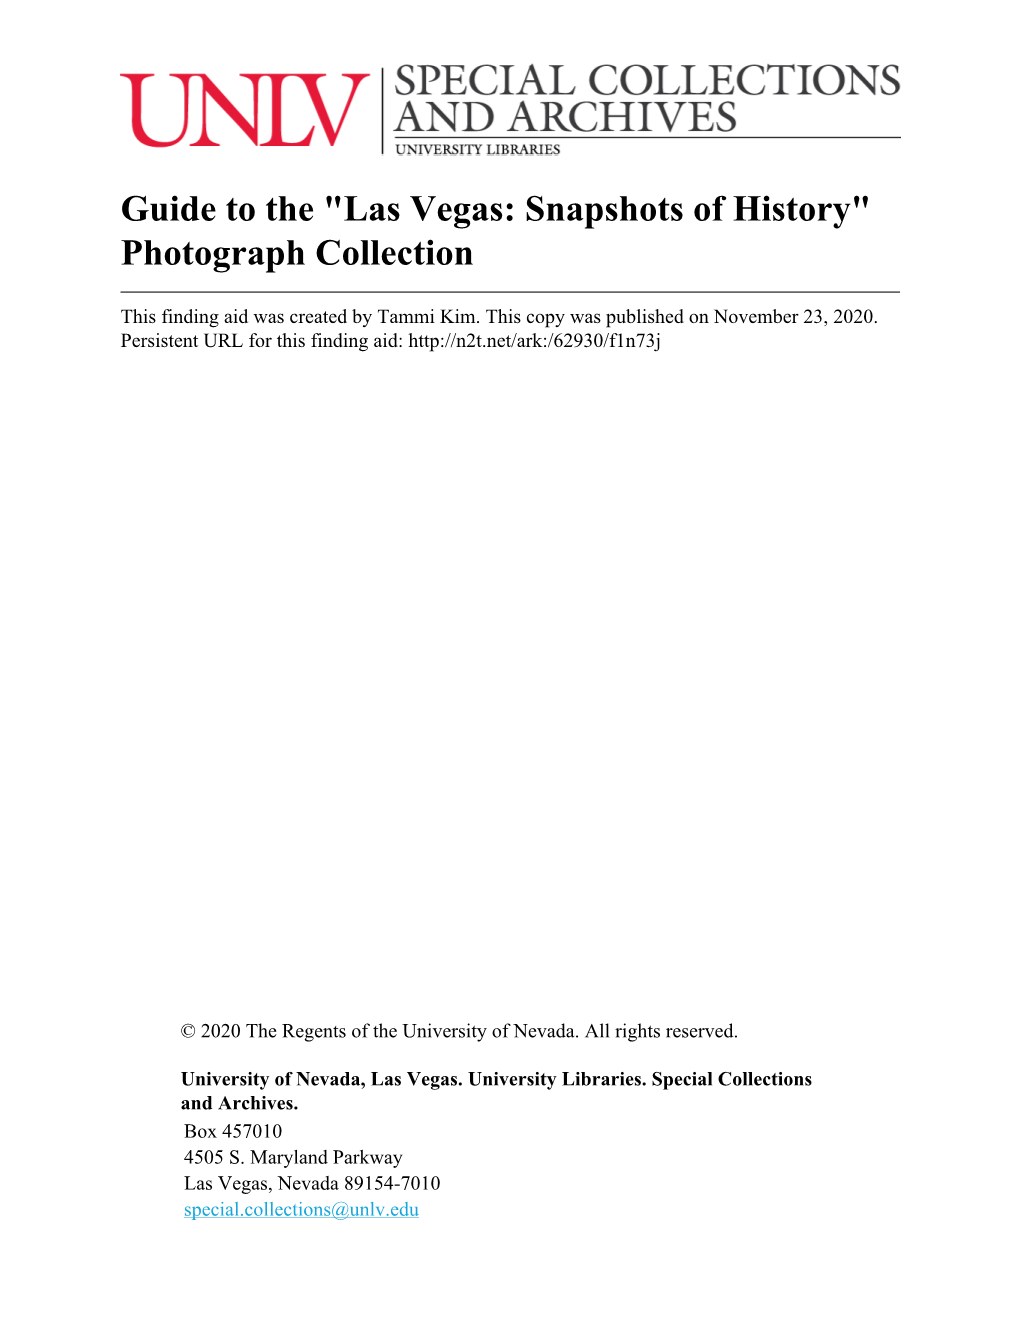 Guide to the "Las Vegas: Snapshots of History" Photograph Collection